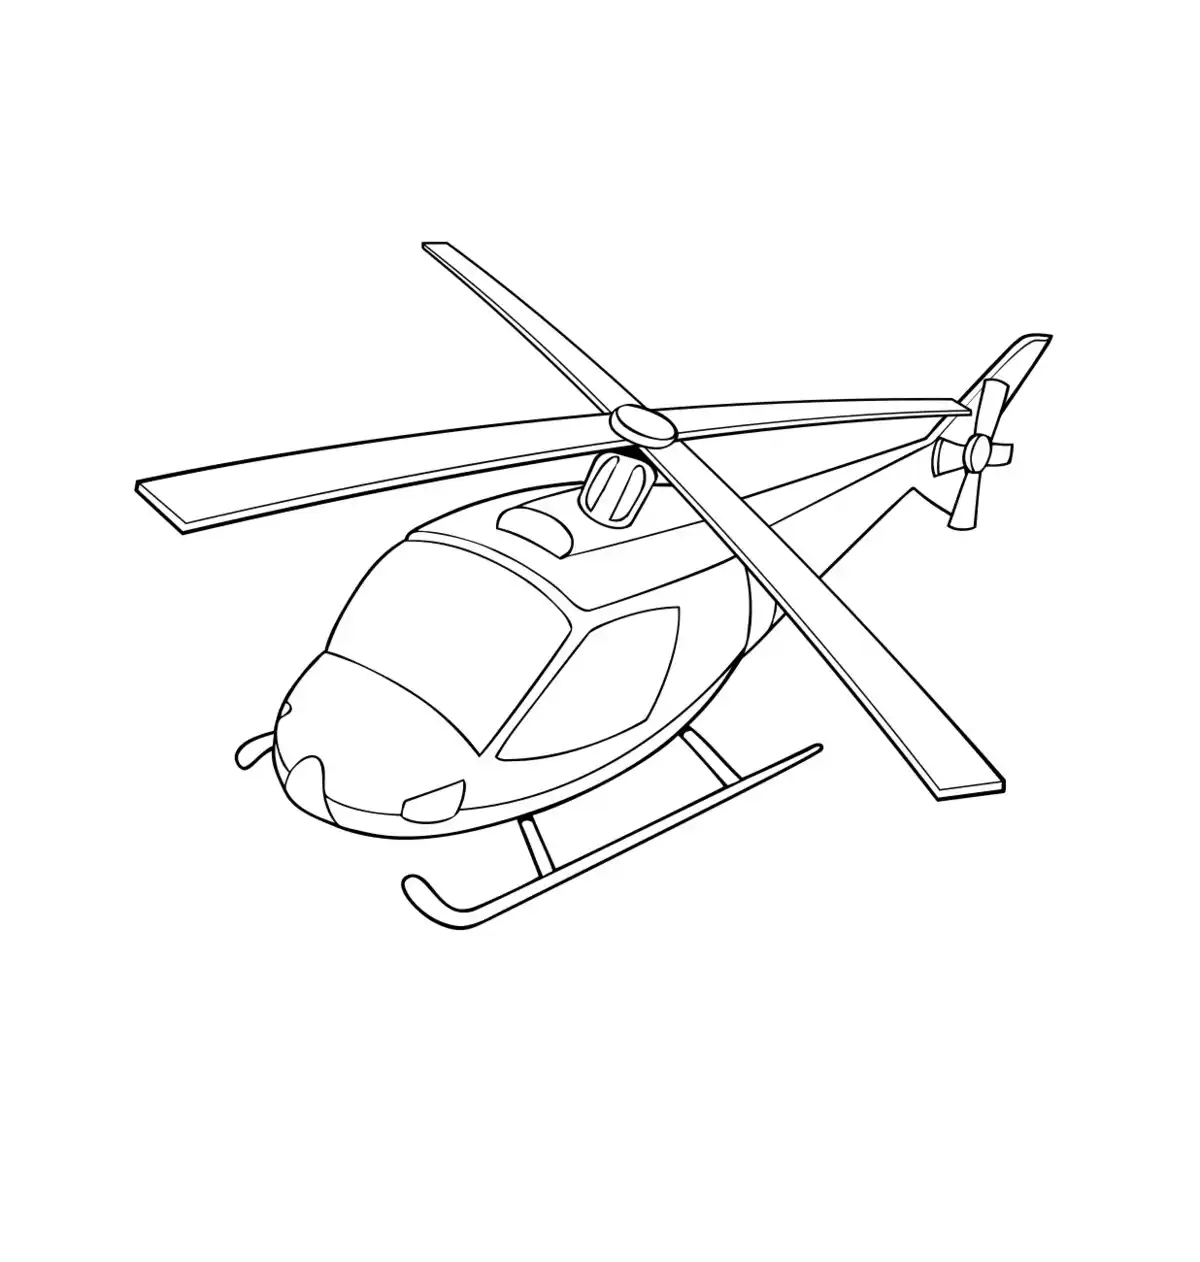 Free Coloring Pages PDF, Helicopter Kids Coloring Pages Pdf